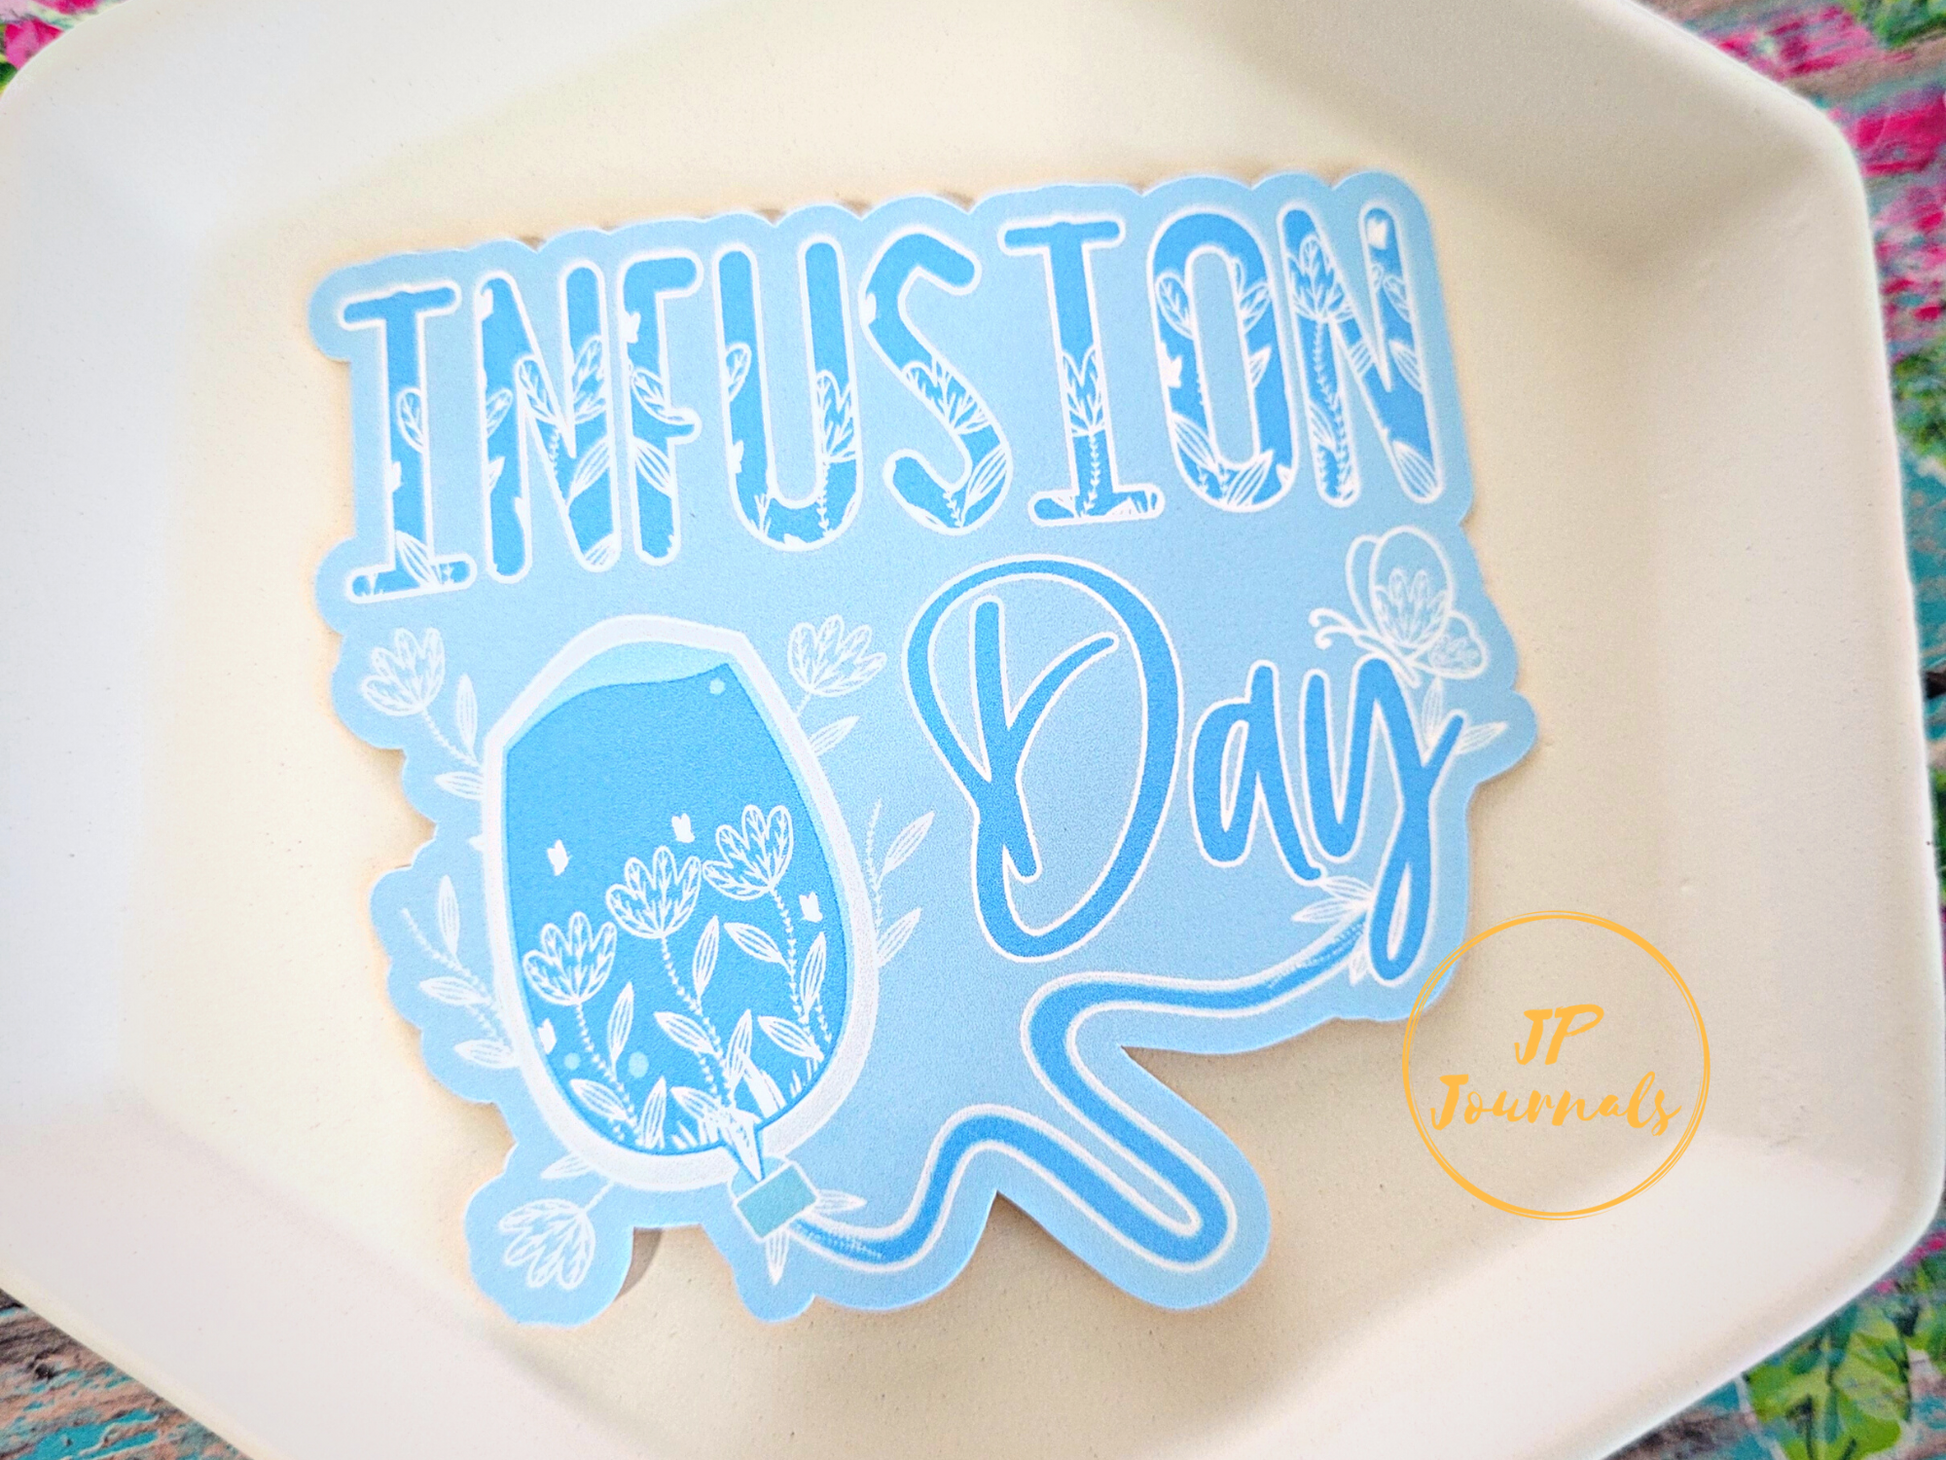 Infusion Day Sticker Gift